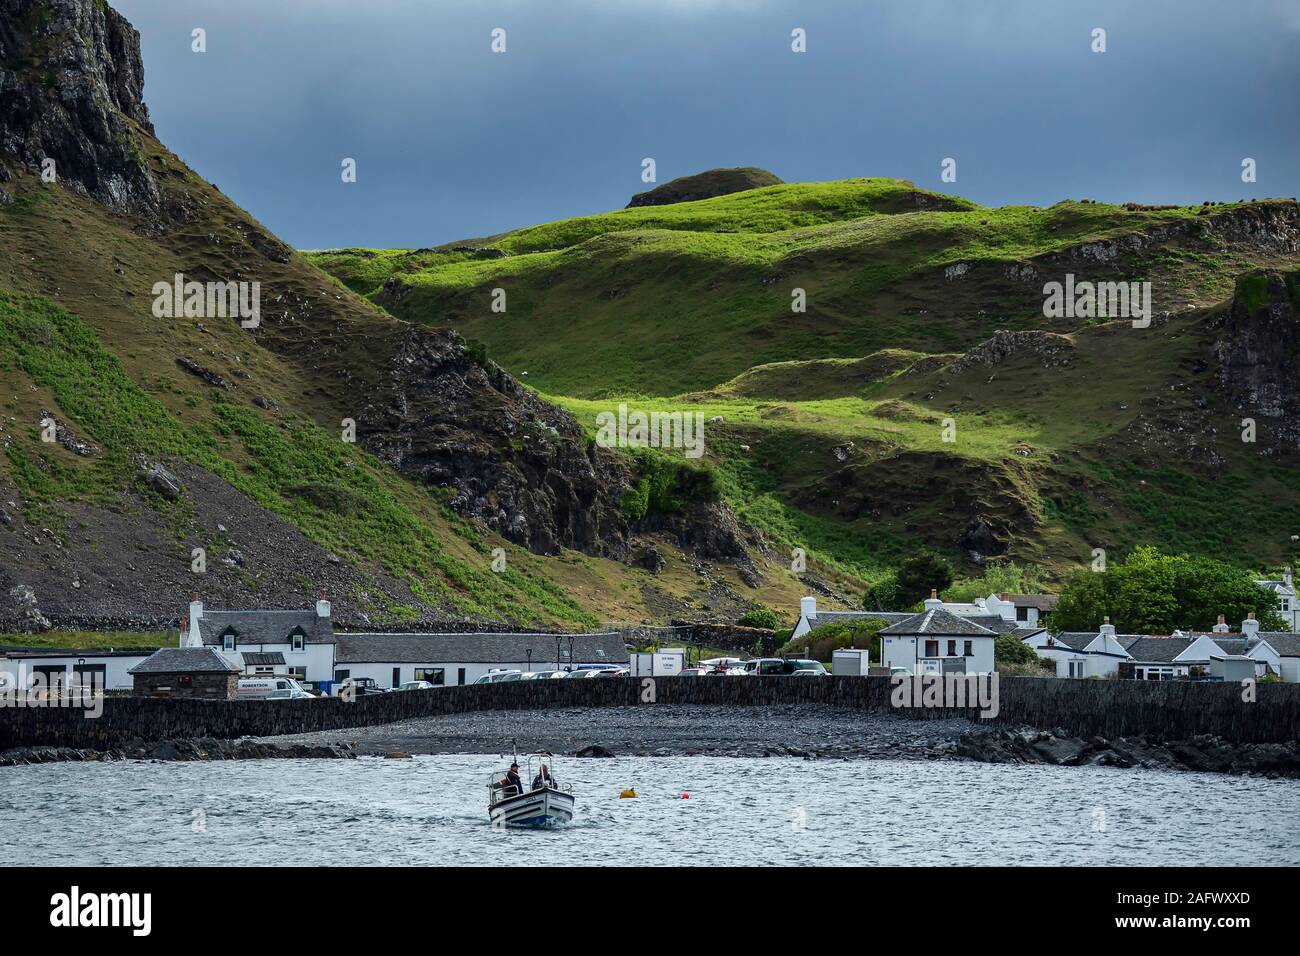 Looking back towards the harbour of Ellenabeich, a small village on the isle of Seil  from Easdale Island, with the small ferry boat approaching. Stock Photo